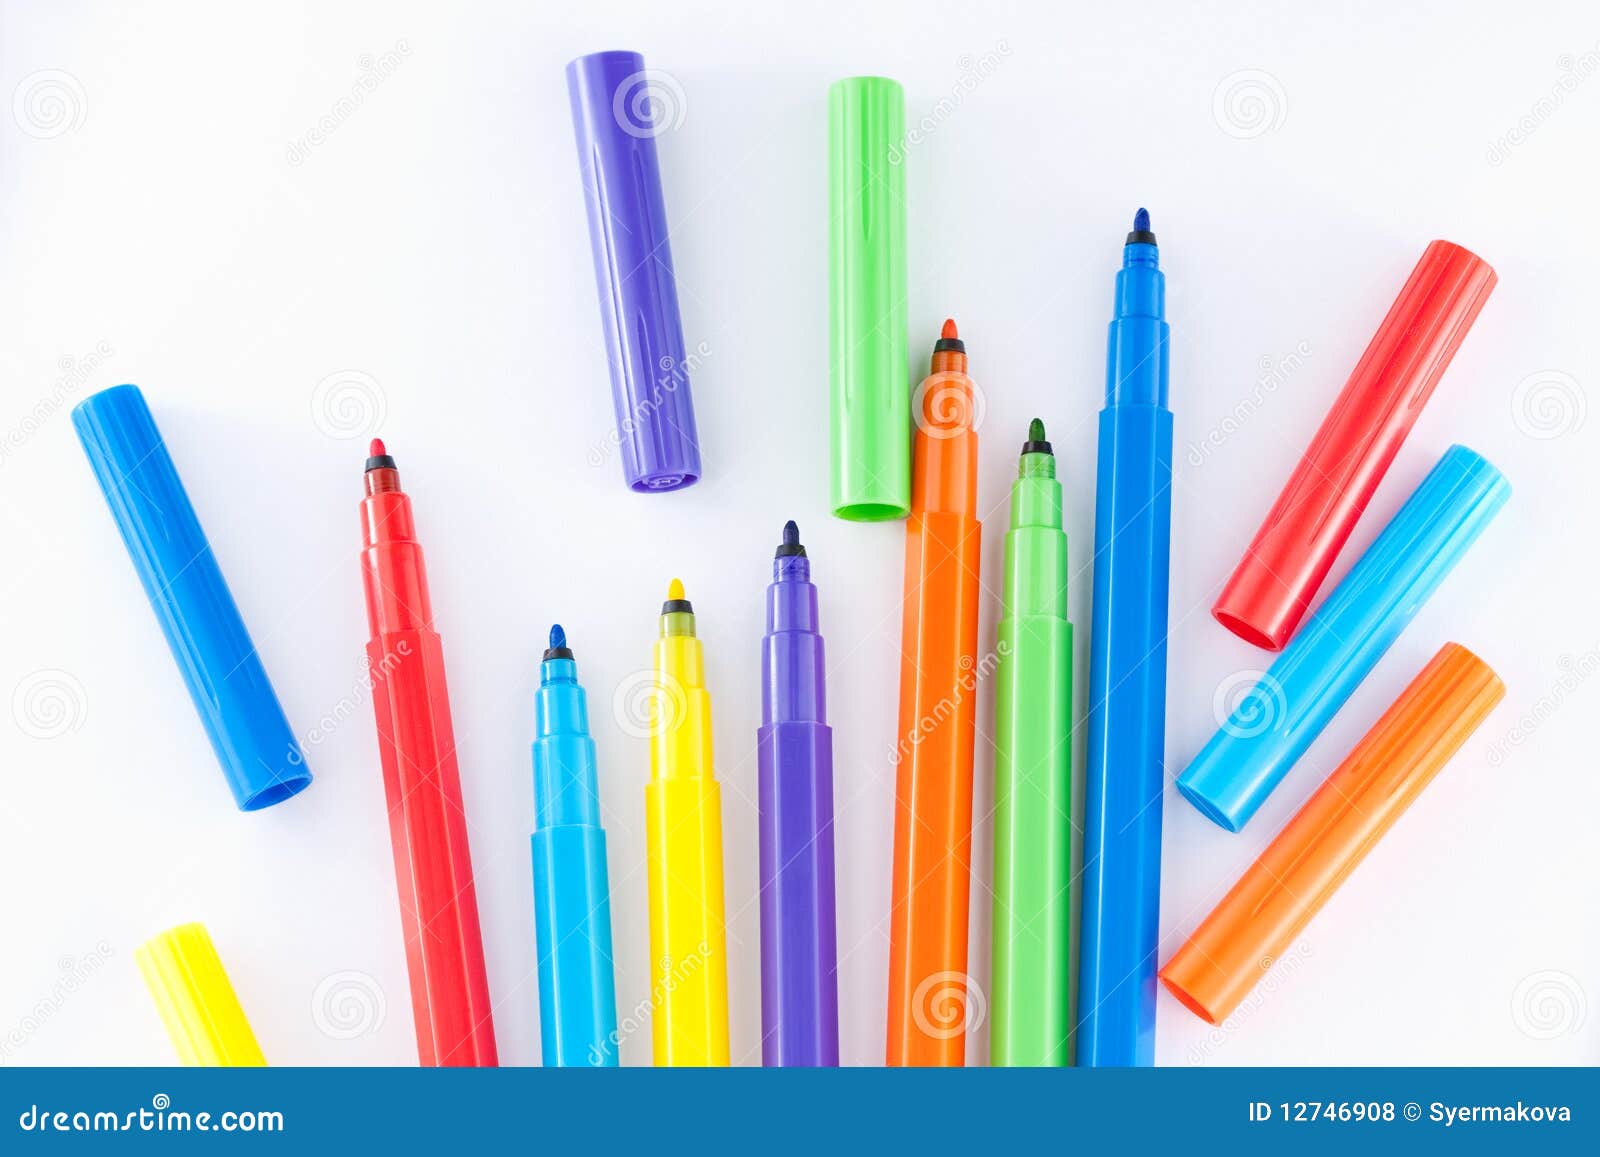 Set Of Four Multicolored Pens Stock Illustration - Download Image Now -  Adhesive Tape, Armed Forces Rank, Bright - iStock